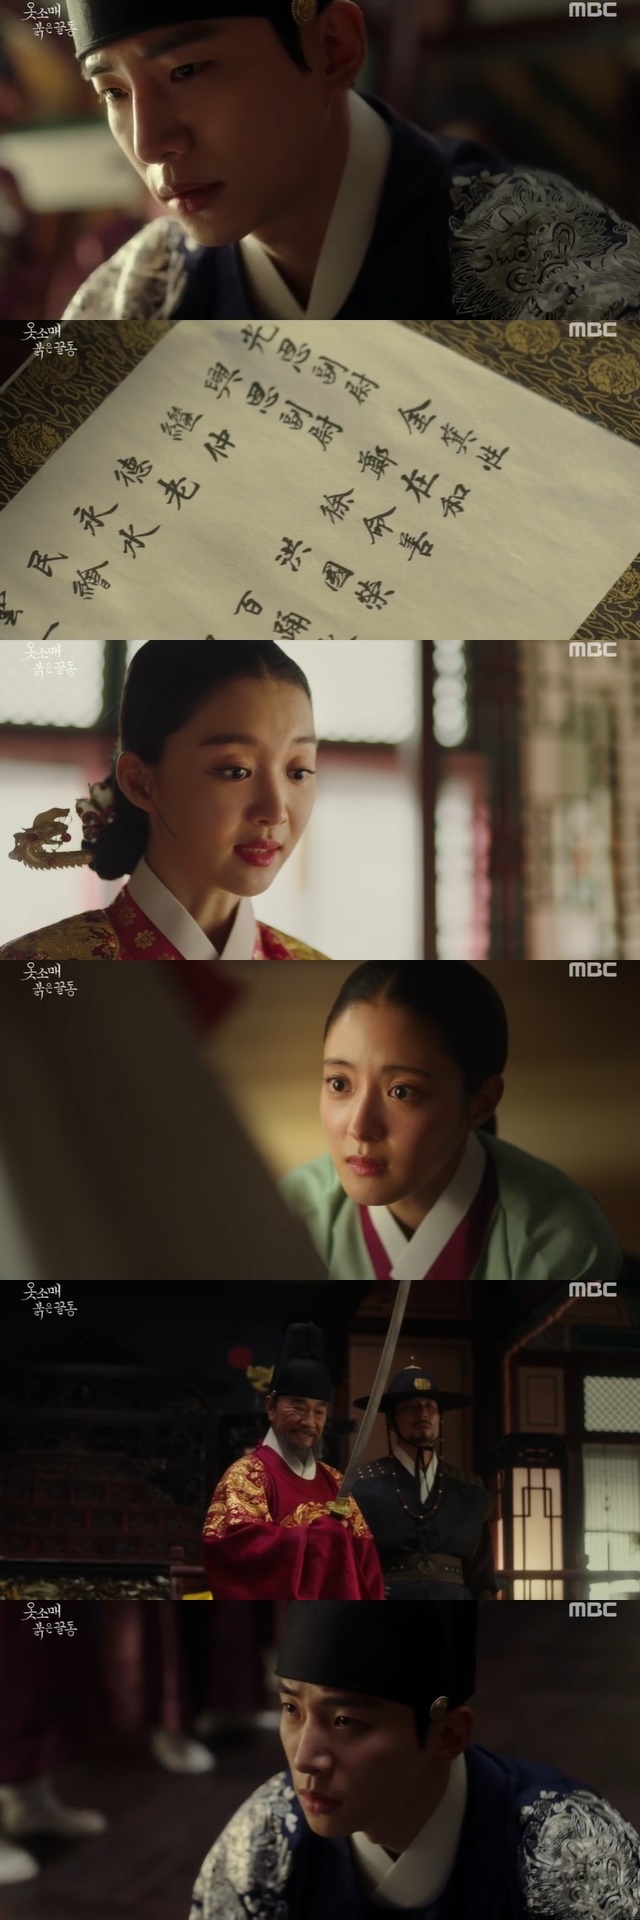 Lee Se-young succeeded in persuading Jang Hee-jin in the middle of Lee Joon-hos Danger as a reverse hater.In the 11th MBC gilt drama The Red Sleeve (playplayplay by Jeong Hae-ri / directed by Jeong Ji-in and Song Yeon-hwa), which was broadcast on December 17, Lee Joon-ho, who fell into Danger, was portrayed as a plot by Cho (Park Ji-young), a manufacturing palace.In the case of touching the backdrop of Yeongjo (Lee Duk-hwa), which took place at the banquet, Lee was overthrown by all sins to protect his mother Lee Hye-bin Hong (Kang Mal-geum).This caused Isan to burn his hand and received a probation from Yeongjo.Sung Duk-im was distressed that there was nothing he could do for the separation, when Park Sang-gung (played by Cha Mi-kyung) came up to Jessie a decisive way to protect the separation from Sung Duk-im.Park Sang-gung said, The Lords King made a promise. I will put Seson on the guard until the end.If the King has been caught in a bottle (dementia), if you forget it in Memory, you should find Memory. There is a document that the Lord wrote in his handwriting and took a seal.Find the document and show it to the Lord. And tell him to keep the promise that the apostle tax (the person of the island) has obtained from blood and life. After that, Sung Duk-im moved busy. Sung Duk-im, who found Lee Hye-bin Hong, showed the letter on his shoulder as evidence and said, Please hurry and find the gold light governor.Sung Duk-im, as a clue to find the gold governor, Jessie Jessie the letters of her shoulder, the rhythm in the hands of Lee Hye-bin Hong,These were the clues that the apostle tax left only to the three most trusted people.At the same time, Hong Duk-ro (Kang Hoon-moo) said that Yeongjo opened an inquiry at Jin-si, and drove one to Dongdeok-ro to find Goodbye My Princess and claim to get the line from Yeongjo before it was abolished by Isan.All this was for the sake of me. But Isan said, for me? Ill let you know what youre doing for me. Dont do anything.Do not have any kind of backfire in mind. Why is this a bad thing? Only a good thing for a low. Are you afraid of the eyes of the world?Its not old, sick, sane Wang Yi, but its one thing to decline, said Isan. How do you know? Why can not I follow your words?My grandfather, Wang Yi, who is old, sick and insane, who you said, is my grandfather who I really love.The mountain bit the Hongdeokro, and the Hongdeokro was frustrated.On the other hand, Sung Duk-ims brother Sung-sik (Yang Byung-yeol) asked Sung Duk-im to leave with himself, not get caught up in any more dangerous things.However, Sung Duk-im refused silently, and Sung-sik noticed the answer only with the expression of Sung Duk-im.The ceremony gave a hint to find the gold medalist instead. The ceremony said, If you have a secret of the letter on your shoulder, you know only one thing. This letter must be divided in half.Sung Duk-im shared the letters and attached them, and soon he noticed where the gold-backed governor was hidden. Sung Duk-im hurried back to the palace to inform the separated people.Sung Duk-im finally asked for a statement from Yeongjos name, saying that there was something to say, but behind the scenes, the inner circles that Yeongjo was waiting for continued, and the dissenter said, Its okay.Deok-mi. Dont be nervous. Ill be back soon. And eventually I heard nothing.The remaining Sungdeokim was worried about what he should do and what he could do with tears.The dismantling of the dismantling was discussed in the battle.Lee said to Yeongjo, Please believe me, and kneel down and say, There is a group of people who slander and harm me. Yeongjo said, Do you know who is the station?It was a list of Dongdukhoe that Cho, a manufacturing palace, pushed to Yeongjo through Hong Jeong-yeo (Jo Hee-bong). Hong Jeong-yeo drove Dongdukhoe to the station.In the meantime, Sung Duk-im found Jang Hee-jin.Sung Duk-im asked Kim to go to the middle of the war and ask him to be on the side of the separation. It is an opportunity to go ahead and act as a national mother.Goodbye My Princess will be devastated by her grace to Mama: will you miss the chance to give grace to the new king?I just dont want to take a little risk. Goodbye My Princess is deposed, and Hua Wan-ju will like it. Mama will be prepared.I am prepared for Scarecrow to be trapped in the room.The heavy-duty Kim was offended by the words Scarecrow, but changed his mind, OK, Ill go to my side. Then, But thats it.Dont think about moving me anymore, he firmly said.